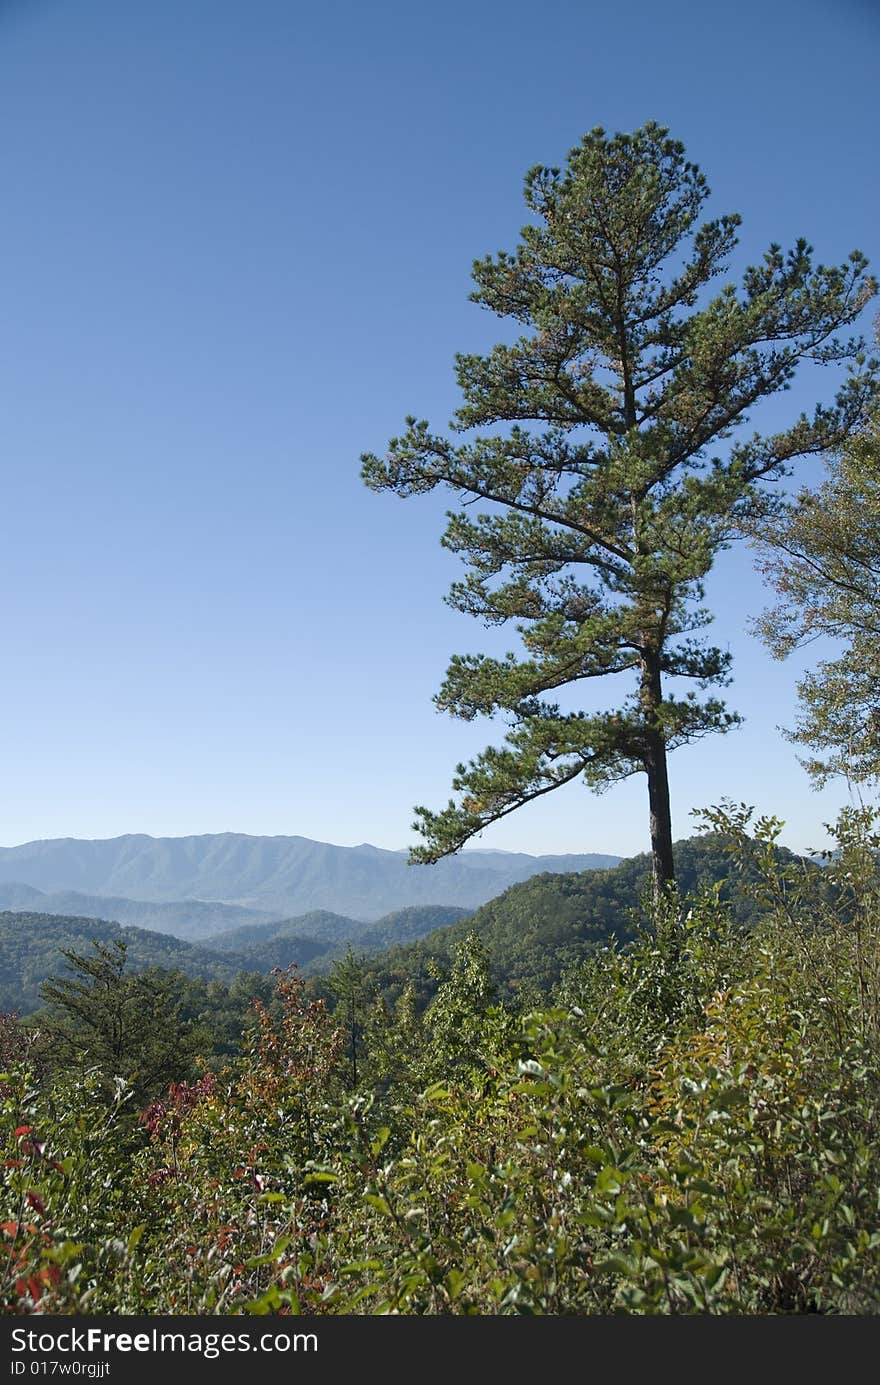 Portrait view of a pine tree overlooking the Smoky Mountains. Portrait view of a pine tree overlooking the Smoky Mountains